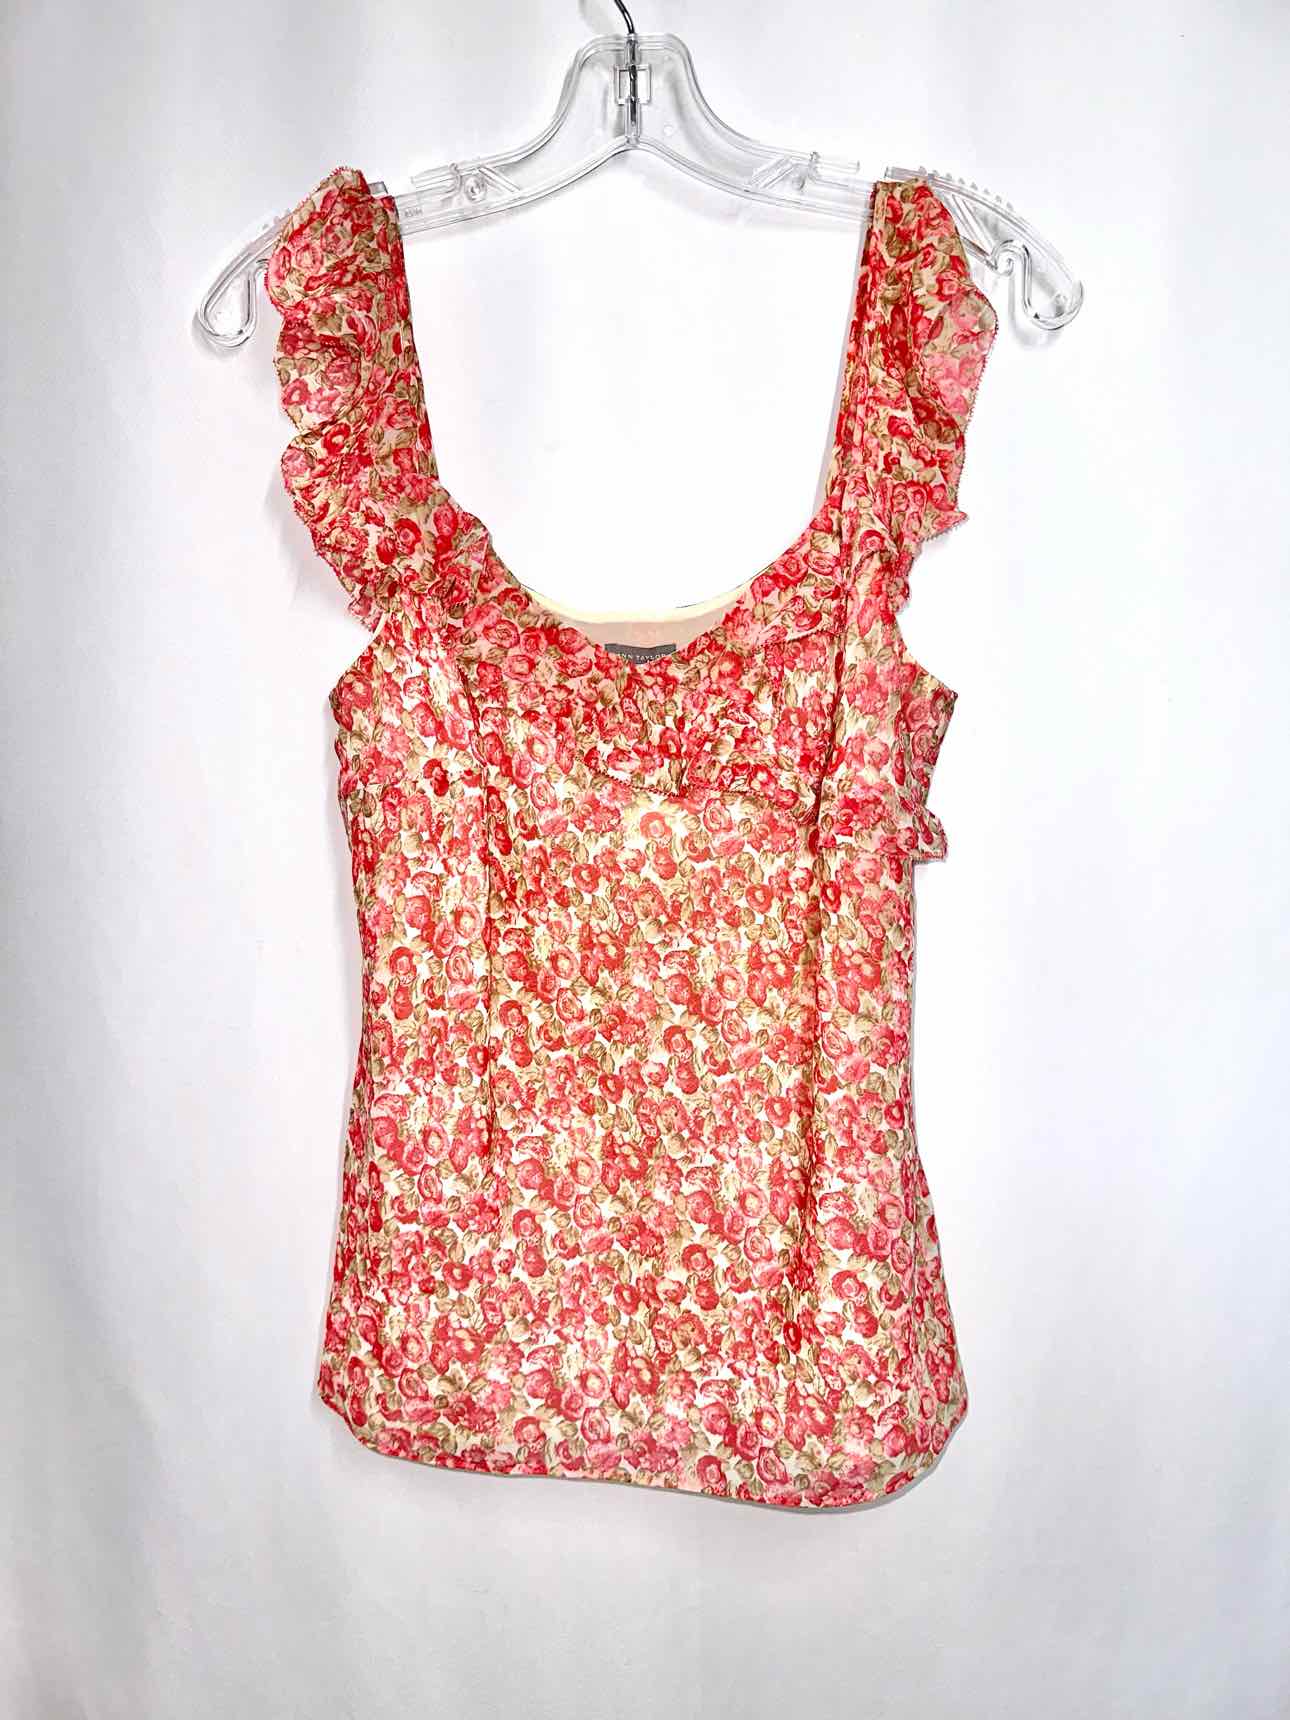 Ann Taylor Pink Floral Sleeveless Top Size M